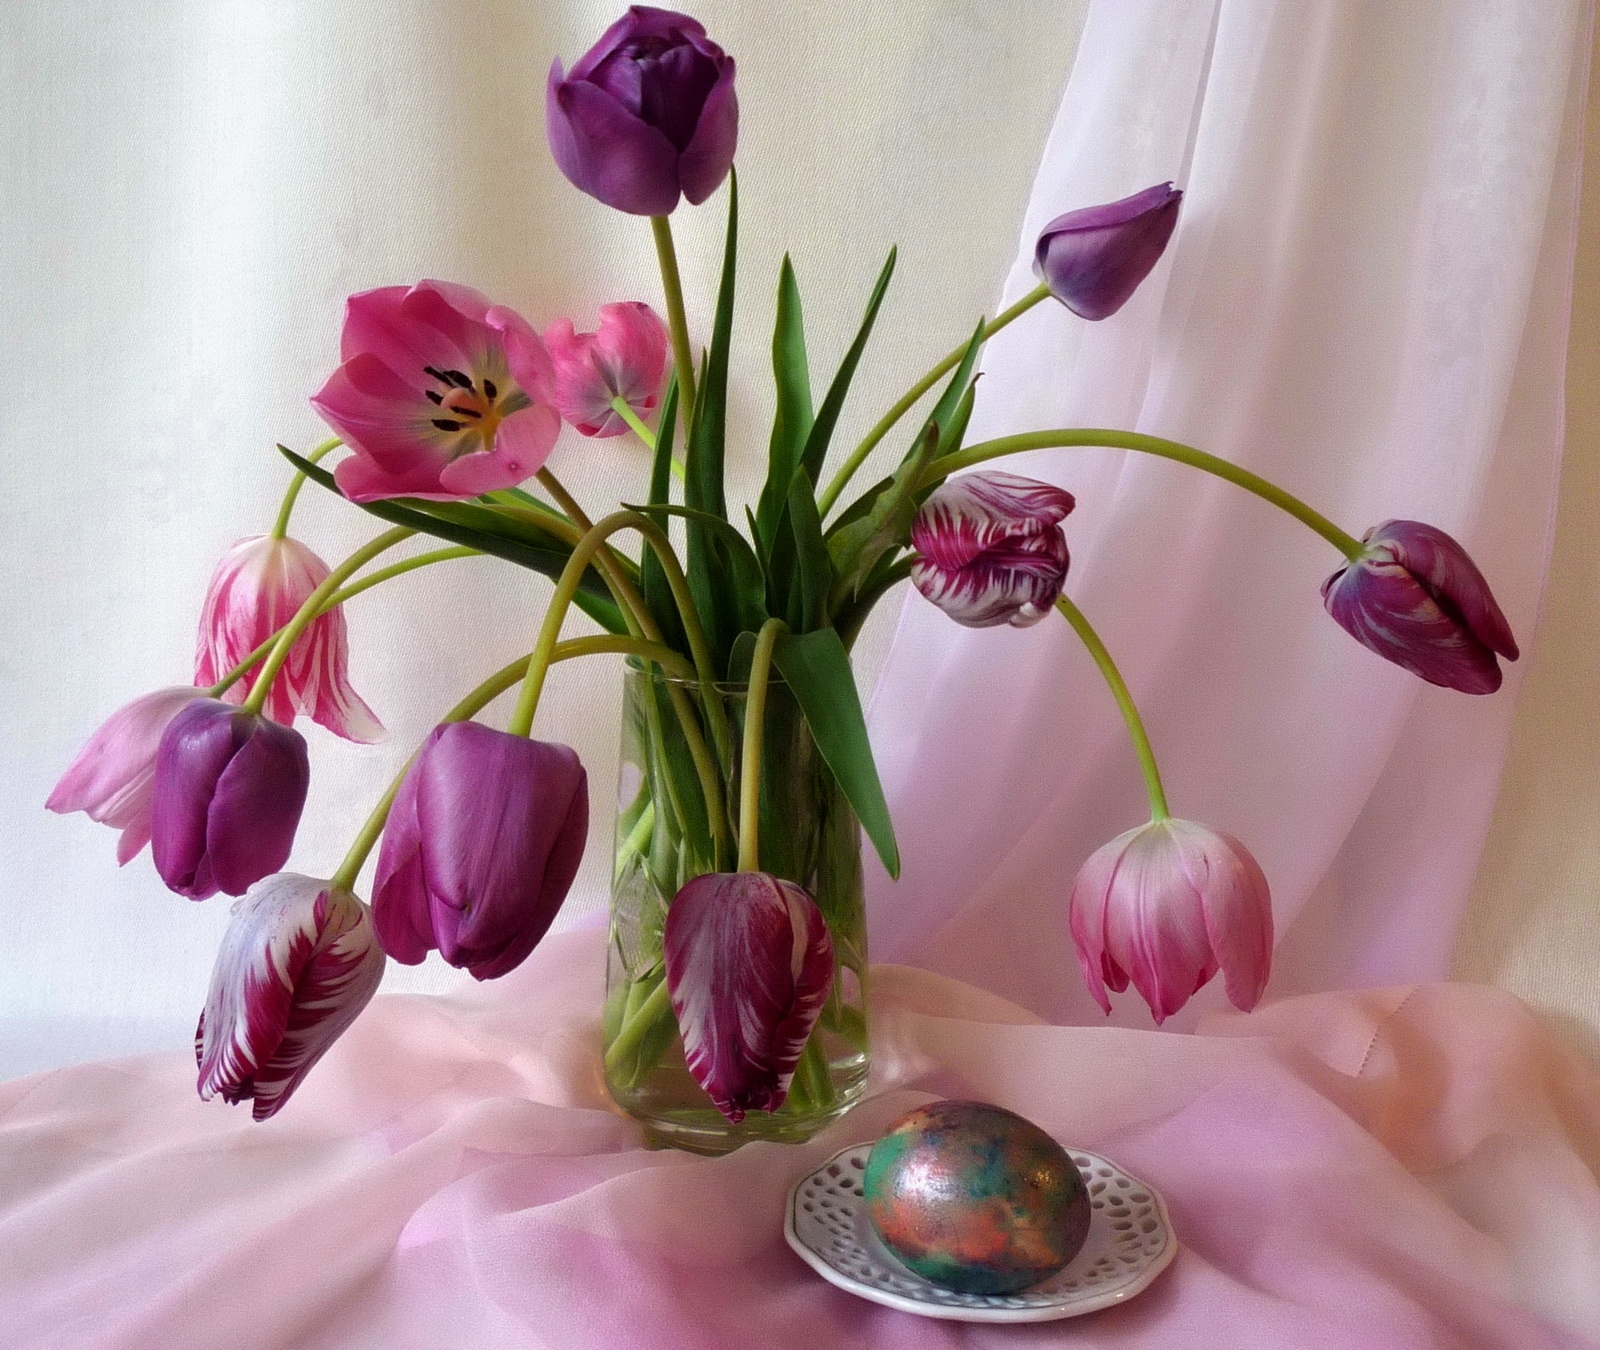 93881 download wallpaper flowers, easter, tulips, holiday, cloth, vase, egg screensavers and pictures for free